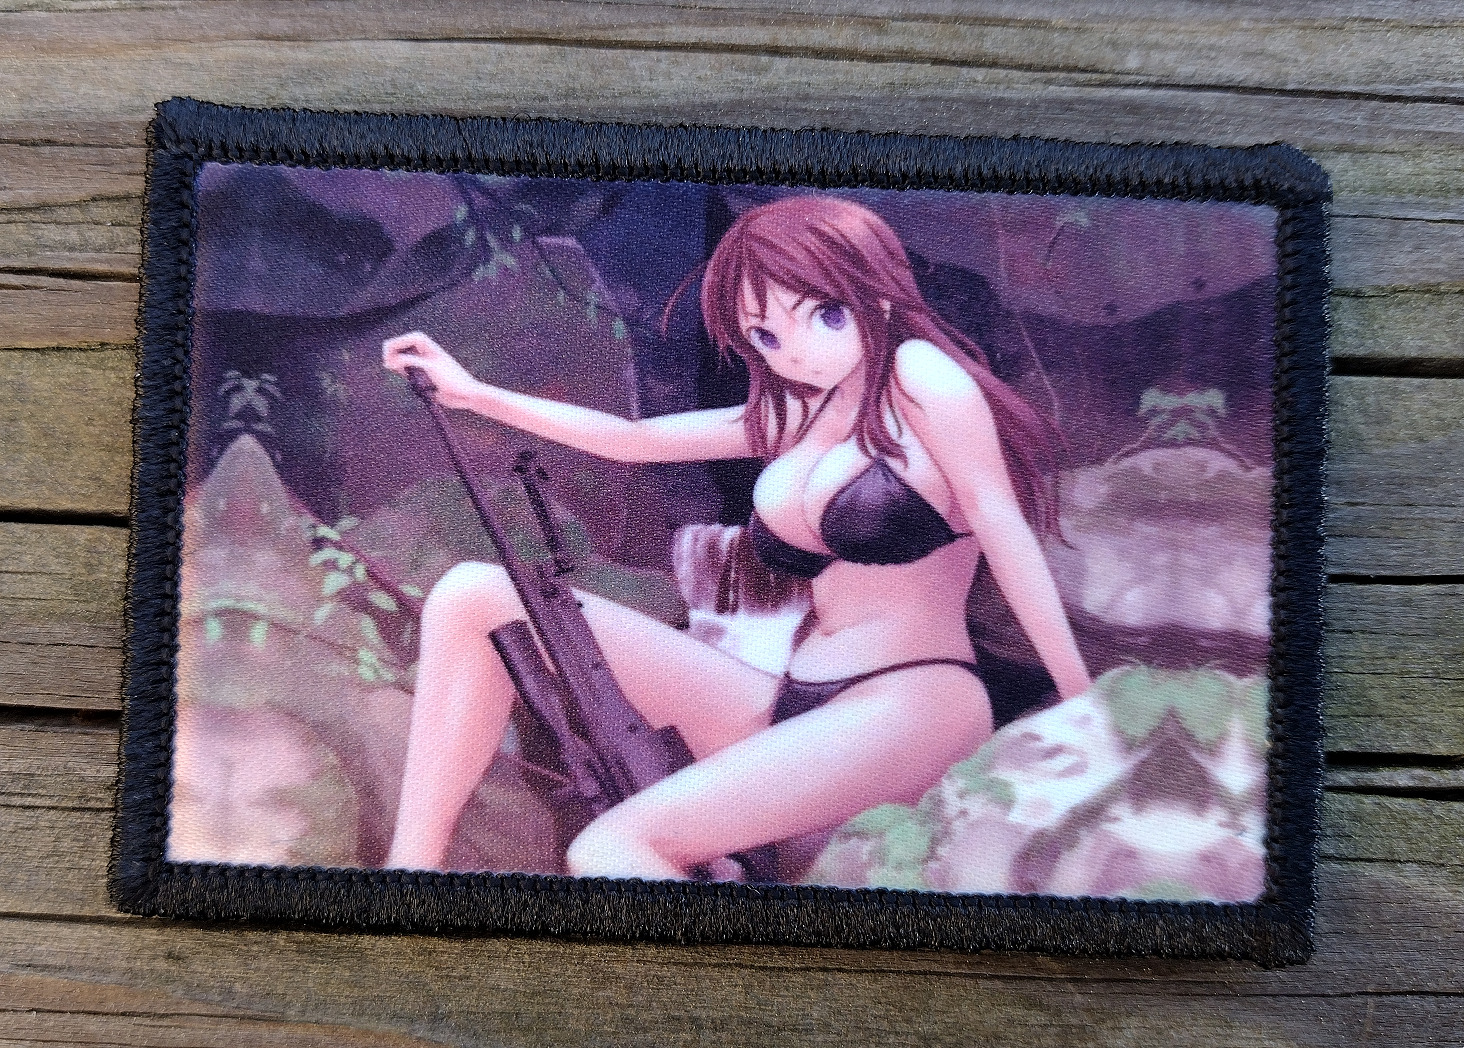 Anime Sniper Morale Patch Hook and Loop Army Sexy Girl Custom Tactical 2A Gear